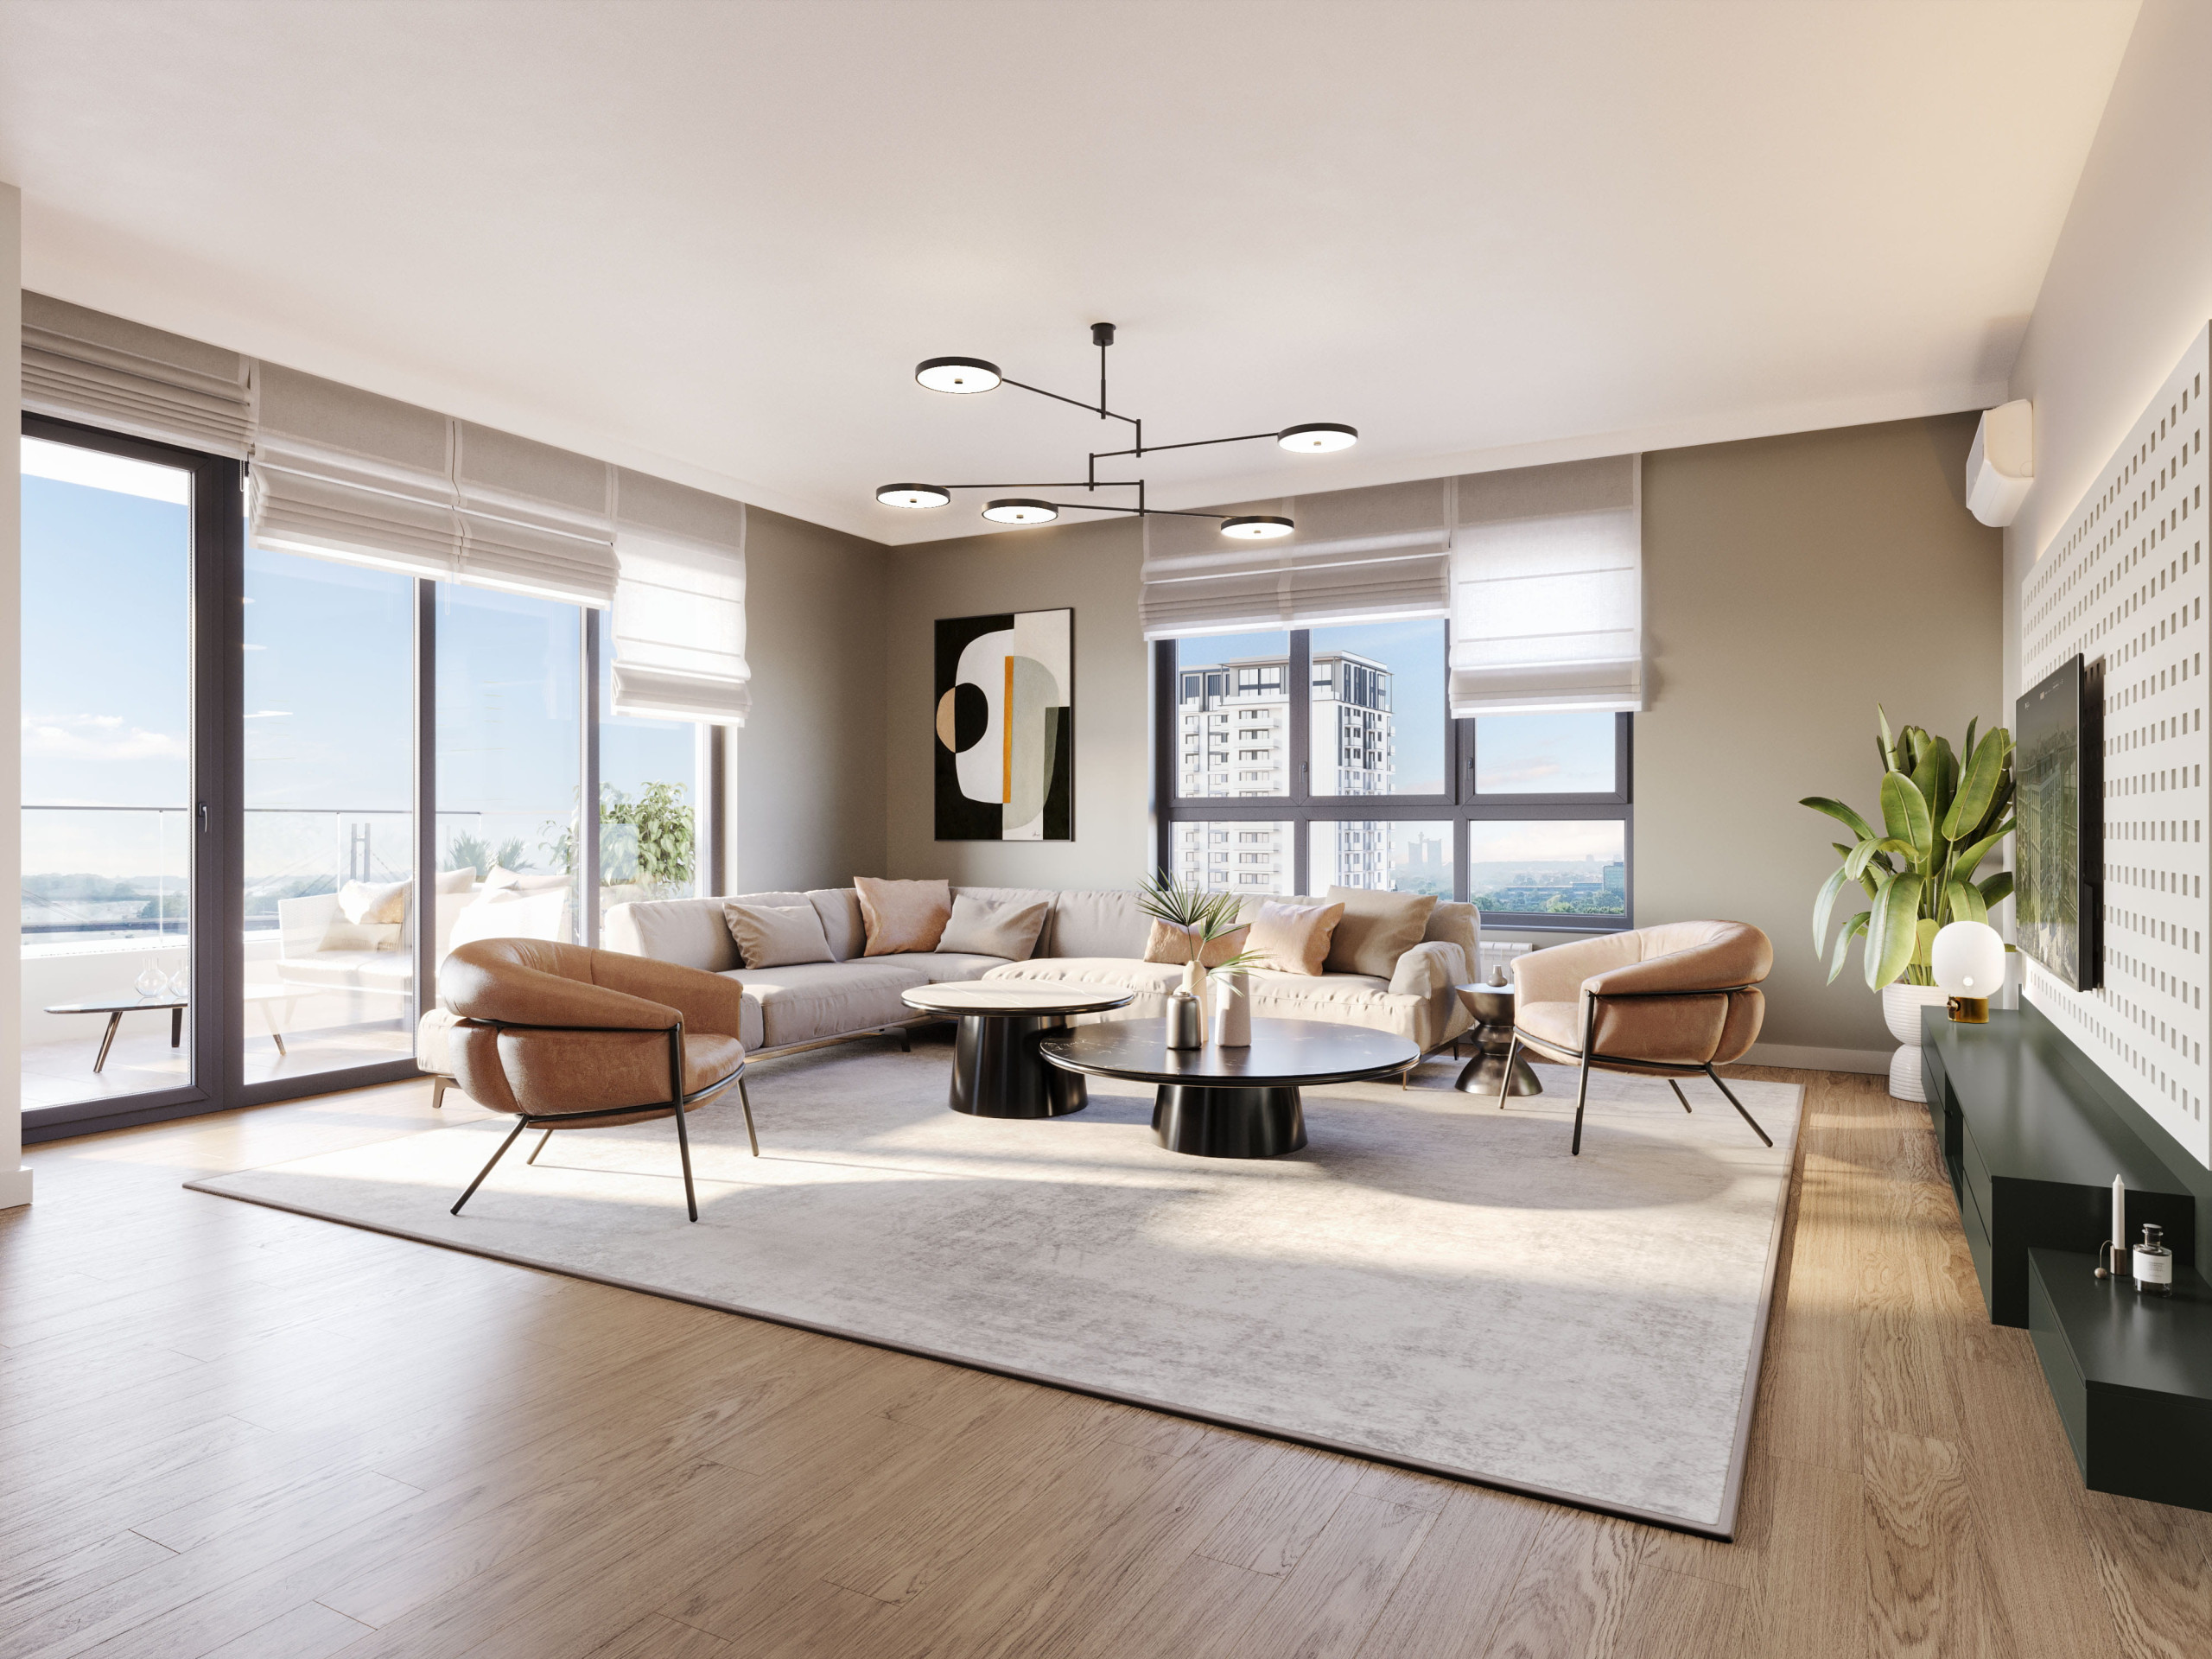 Penthouse living room in BW Nota building in Belgrade Waterfront